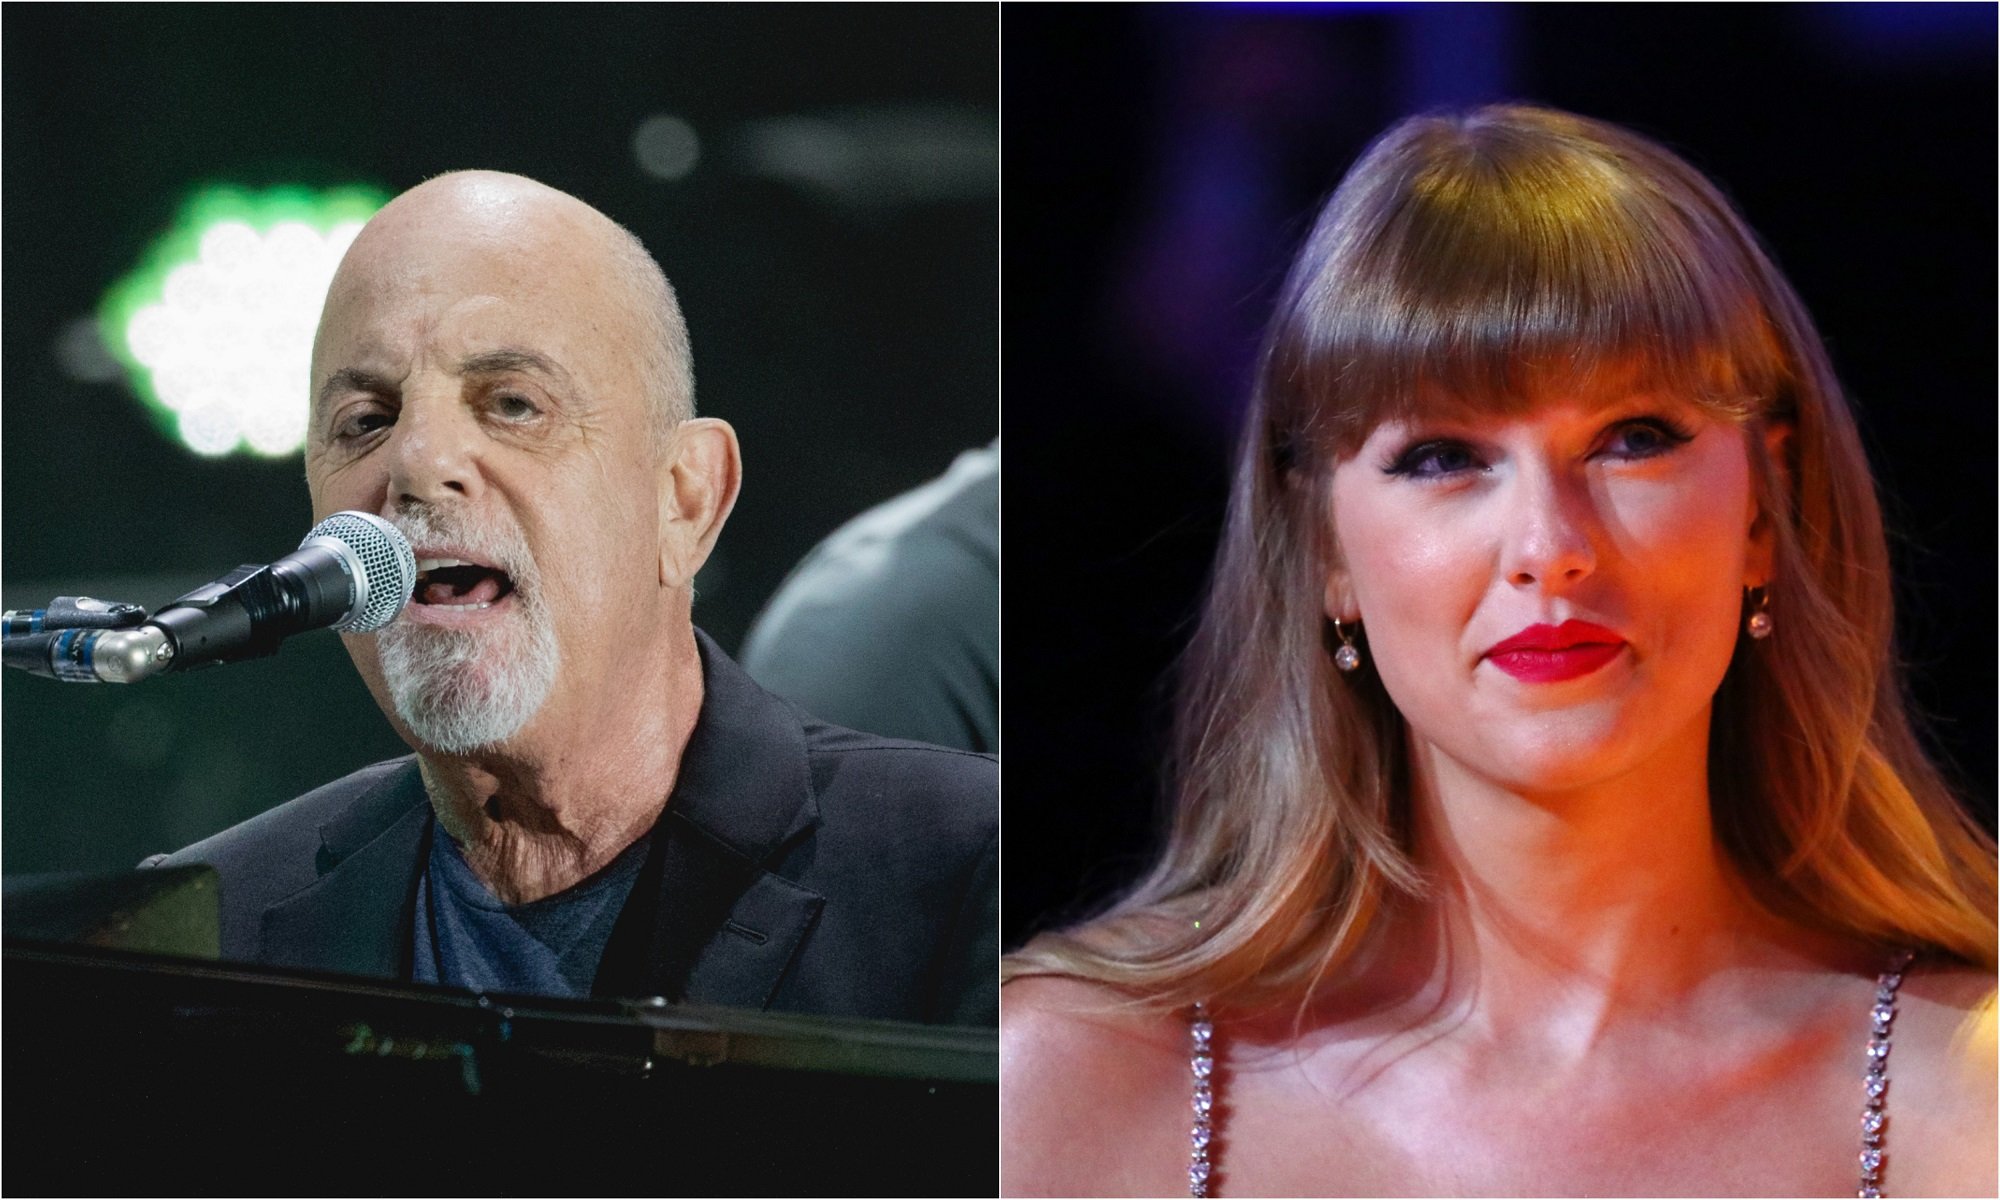 Is Taylor Swift the Beatles of her generation? Music legend Billy